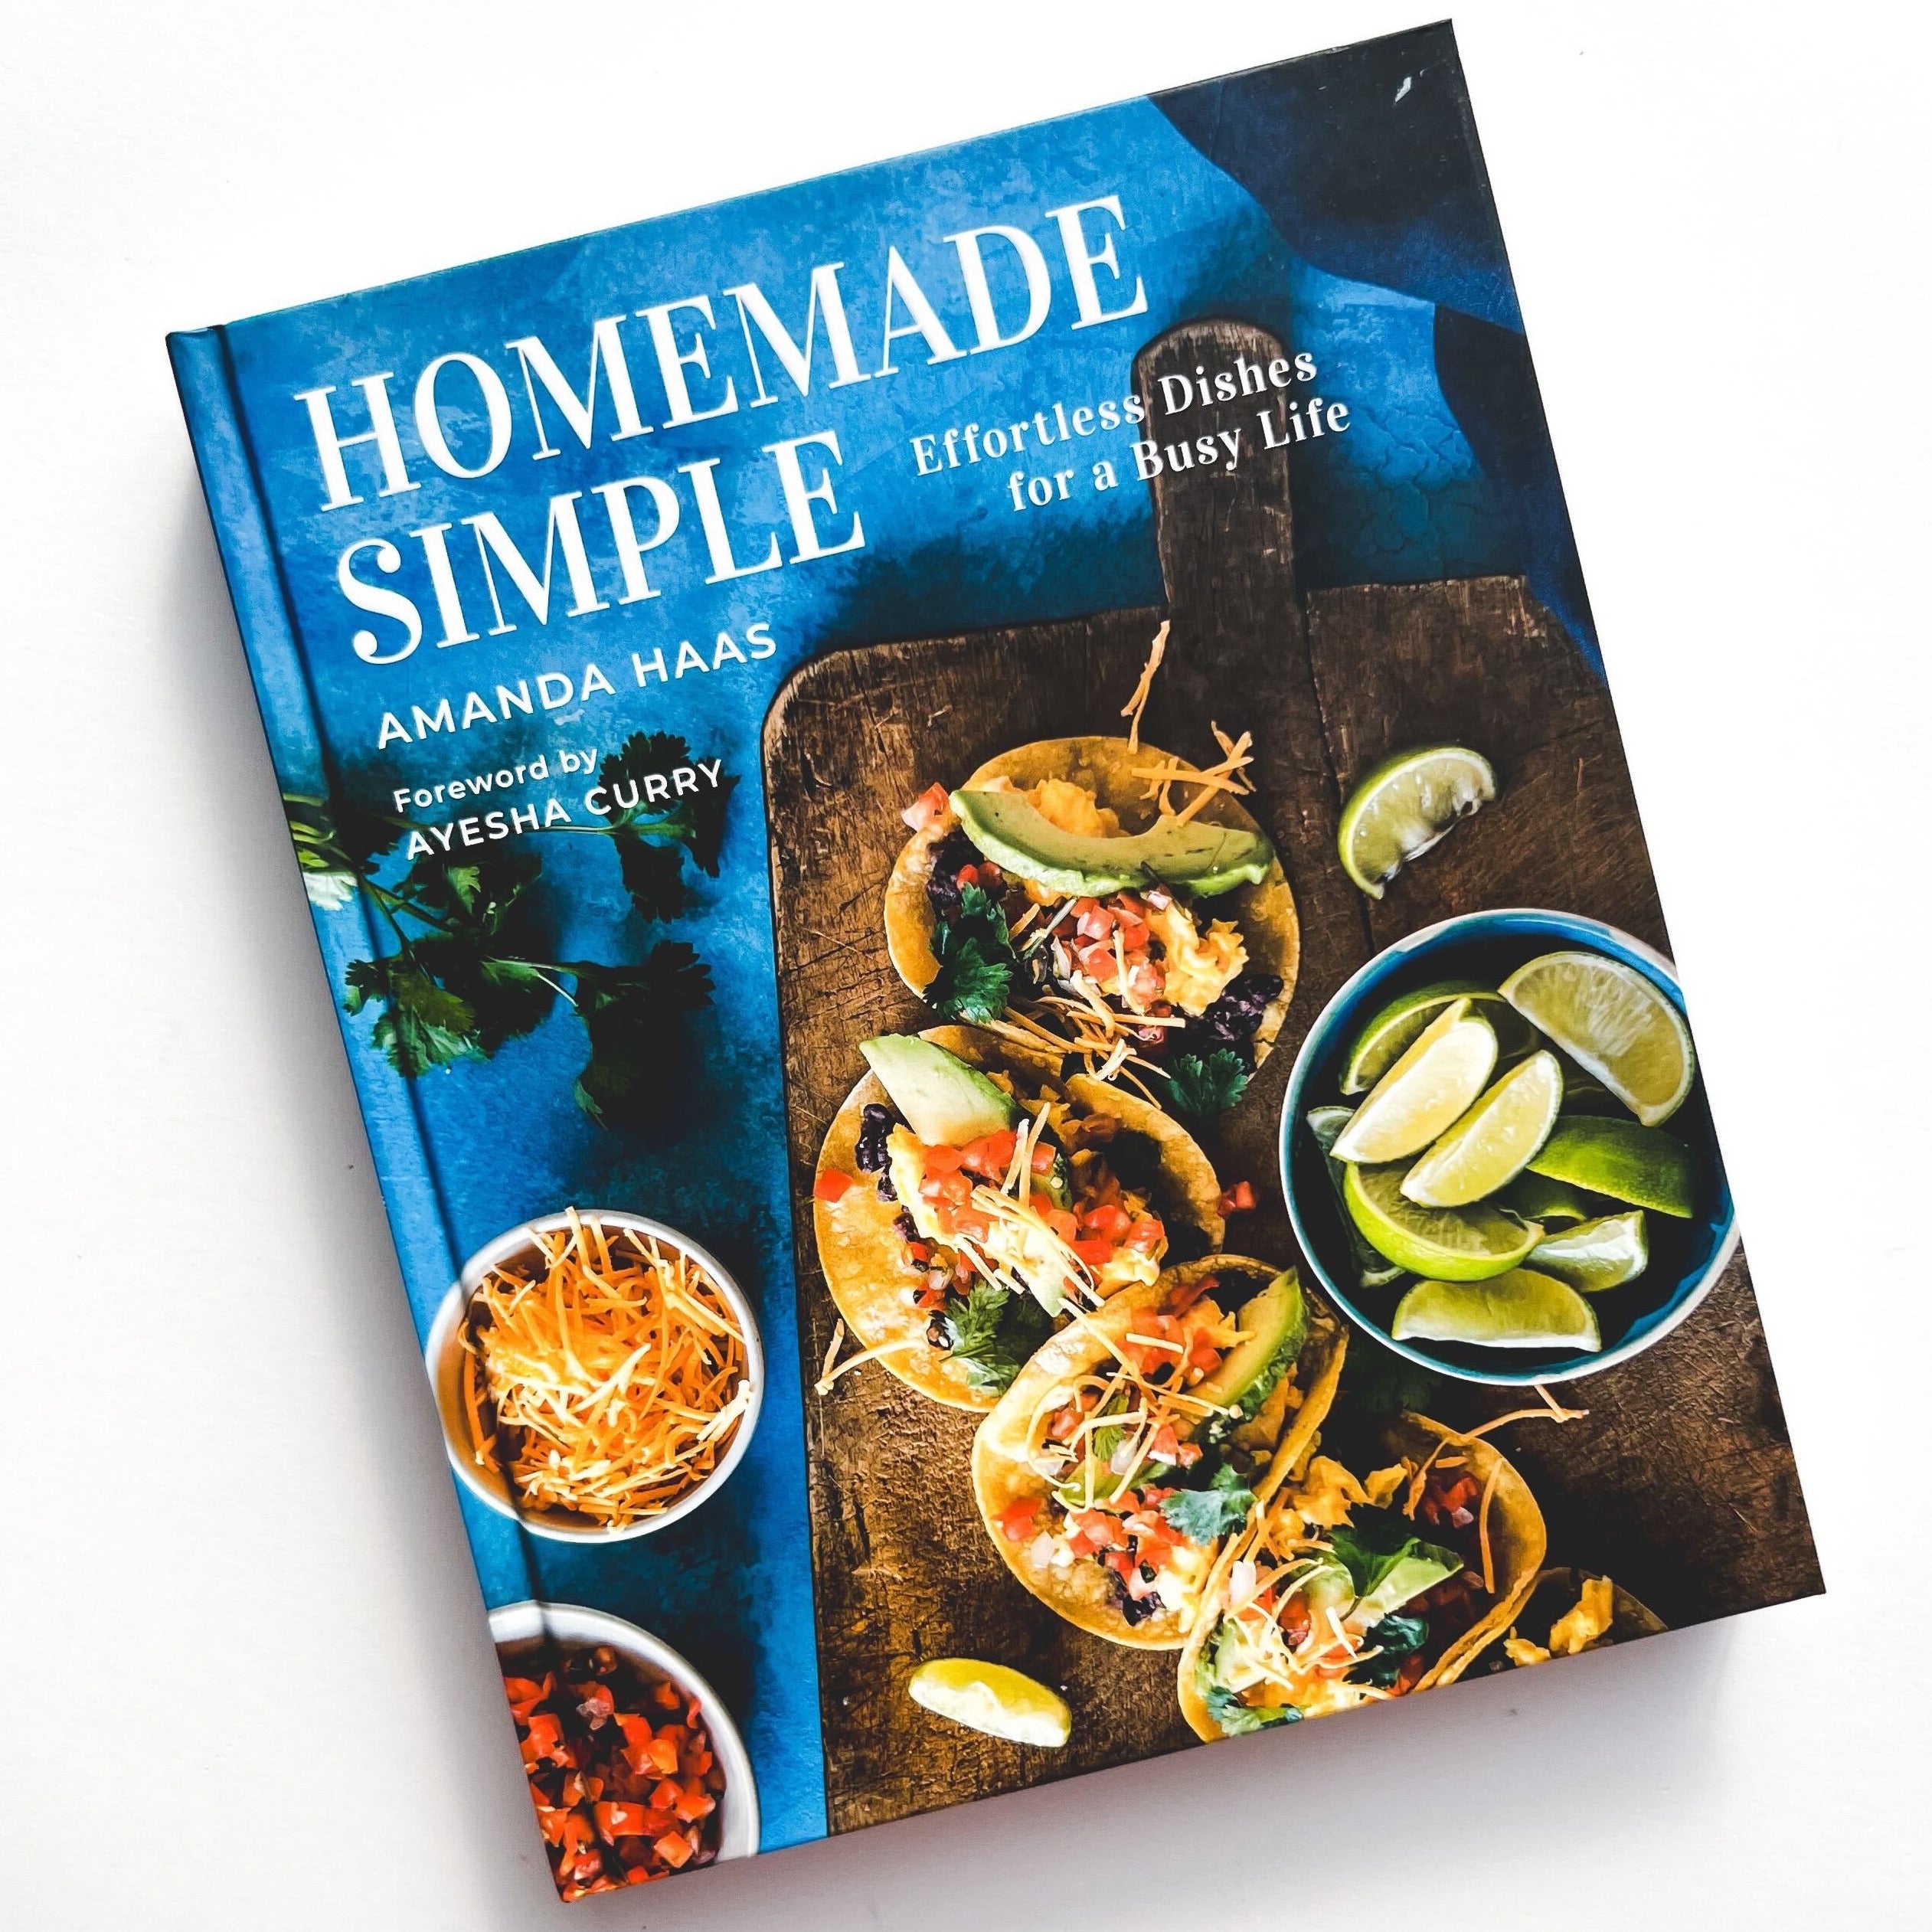 Blue Homemade Simple book cover with photo of tacos